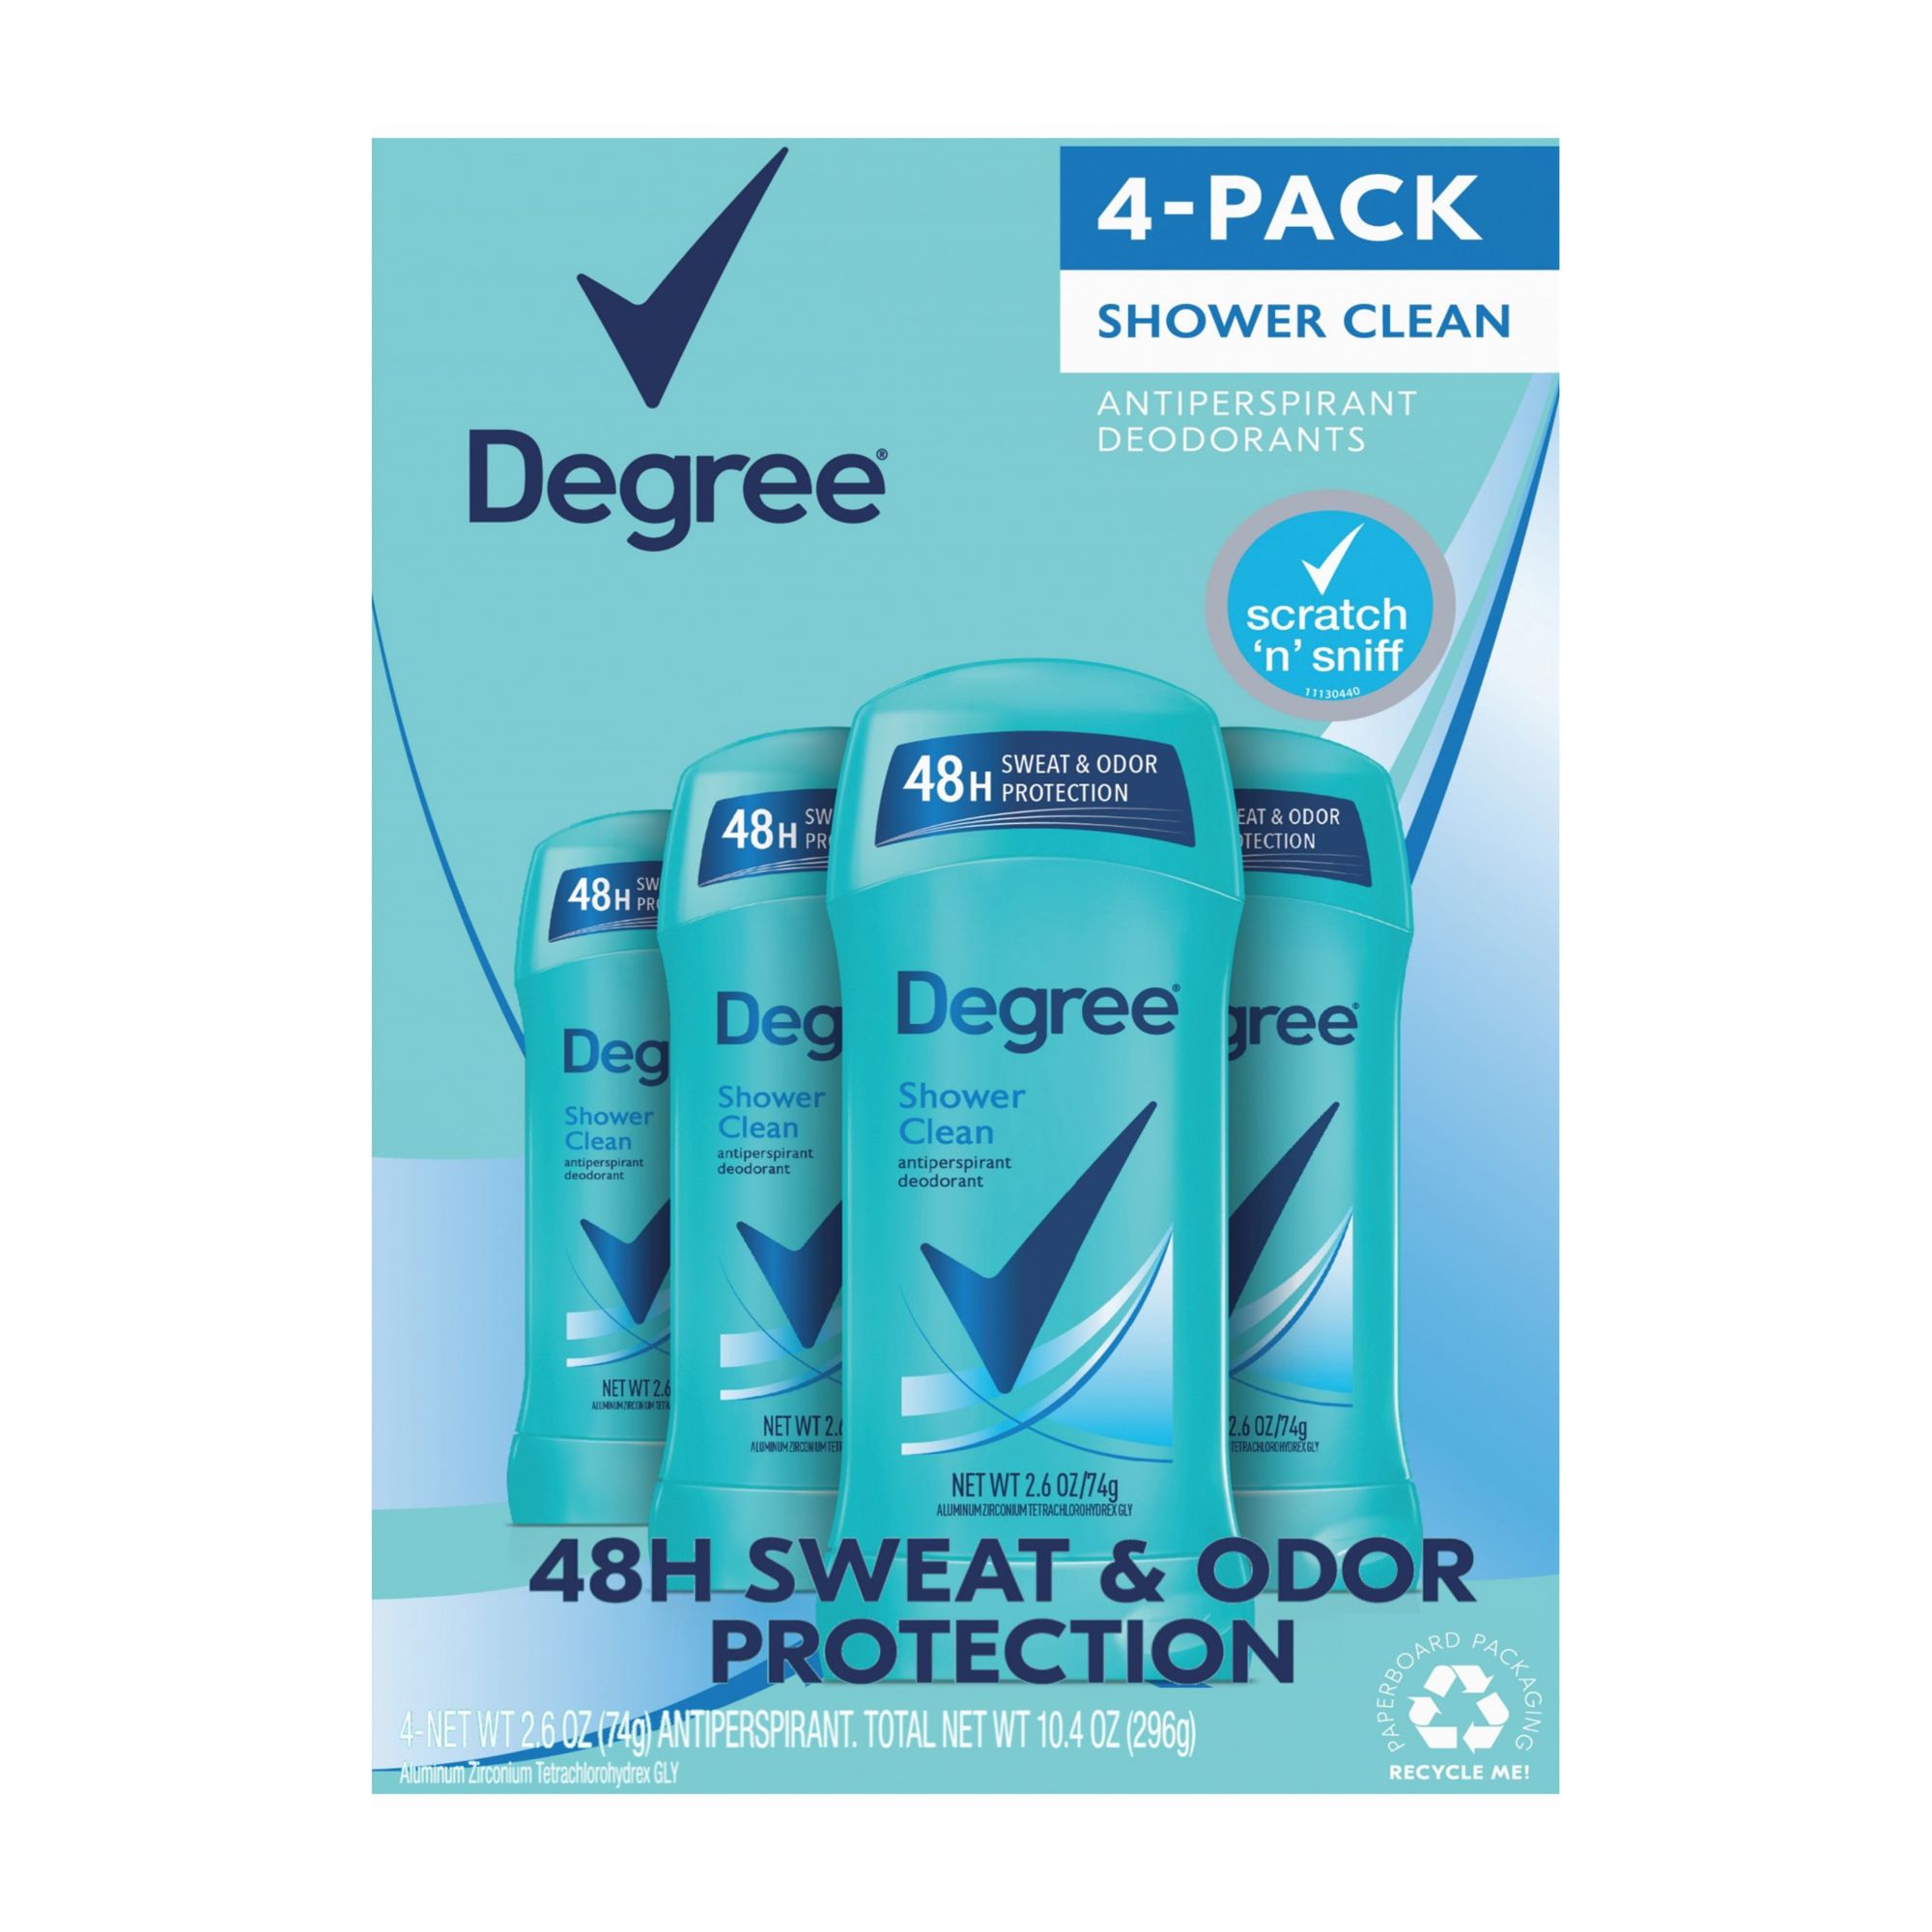 Women Shower Clean Clinical Protection Antiperspirant Deodorant